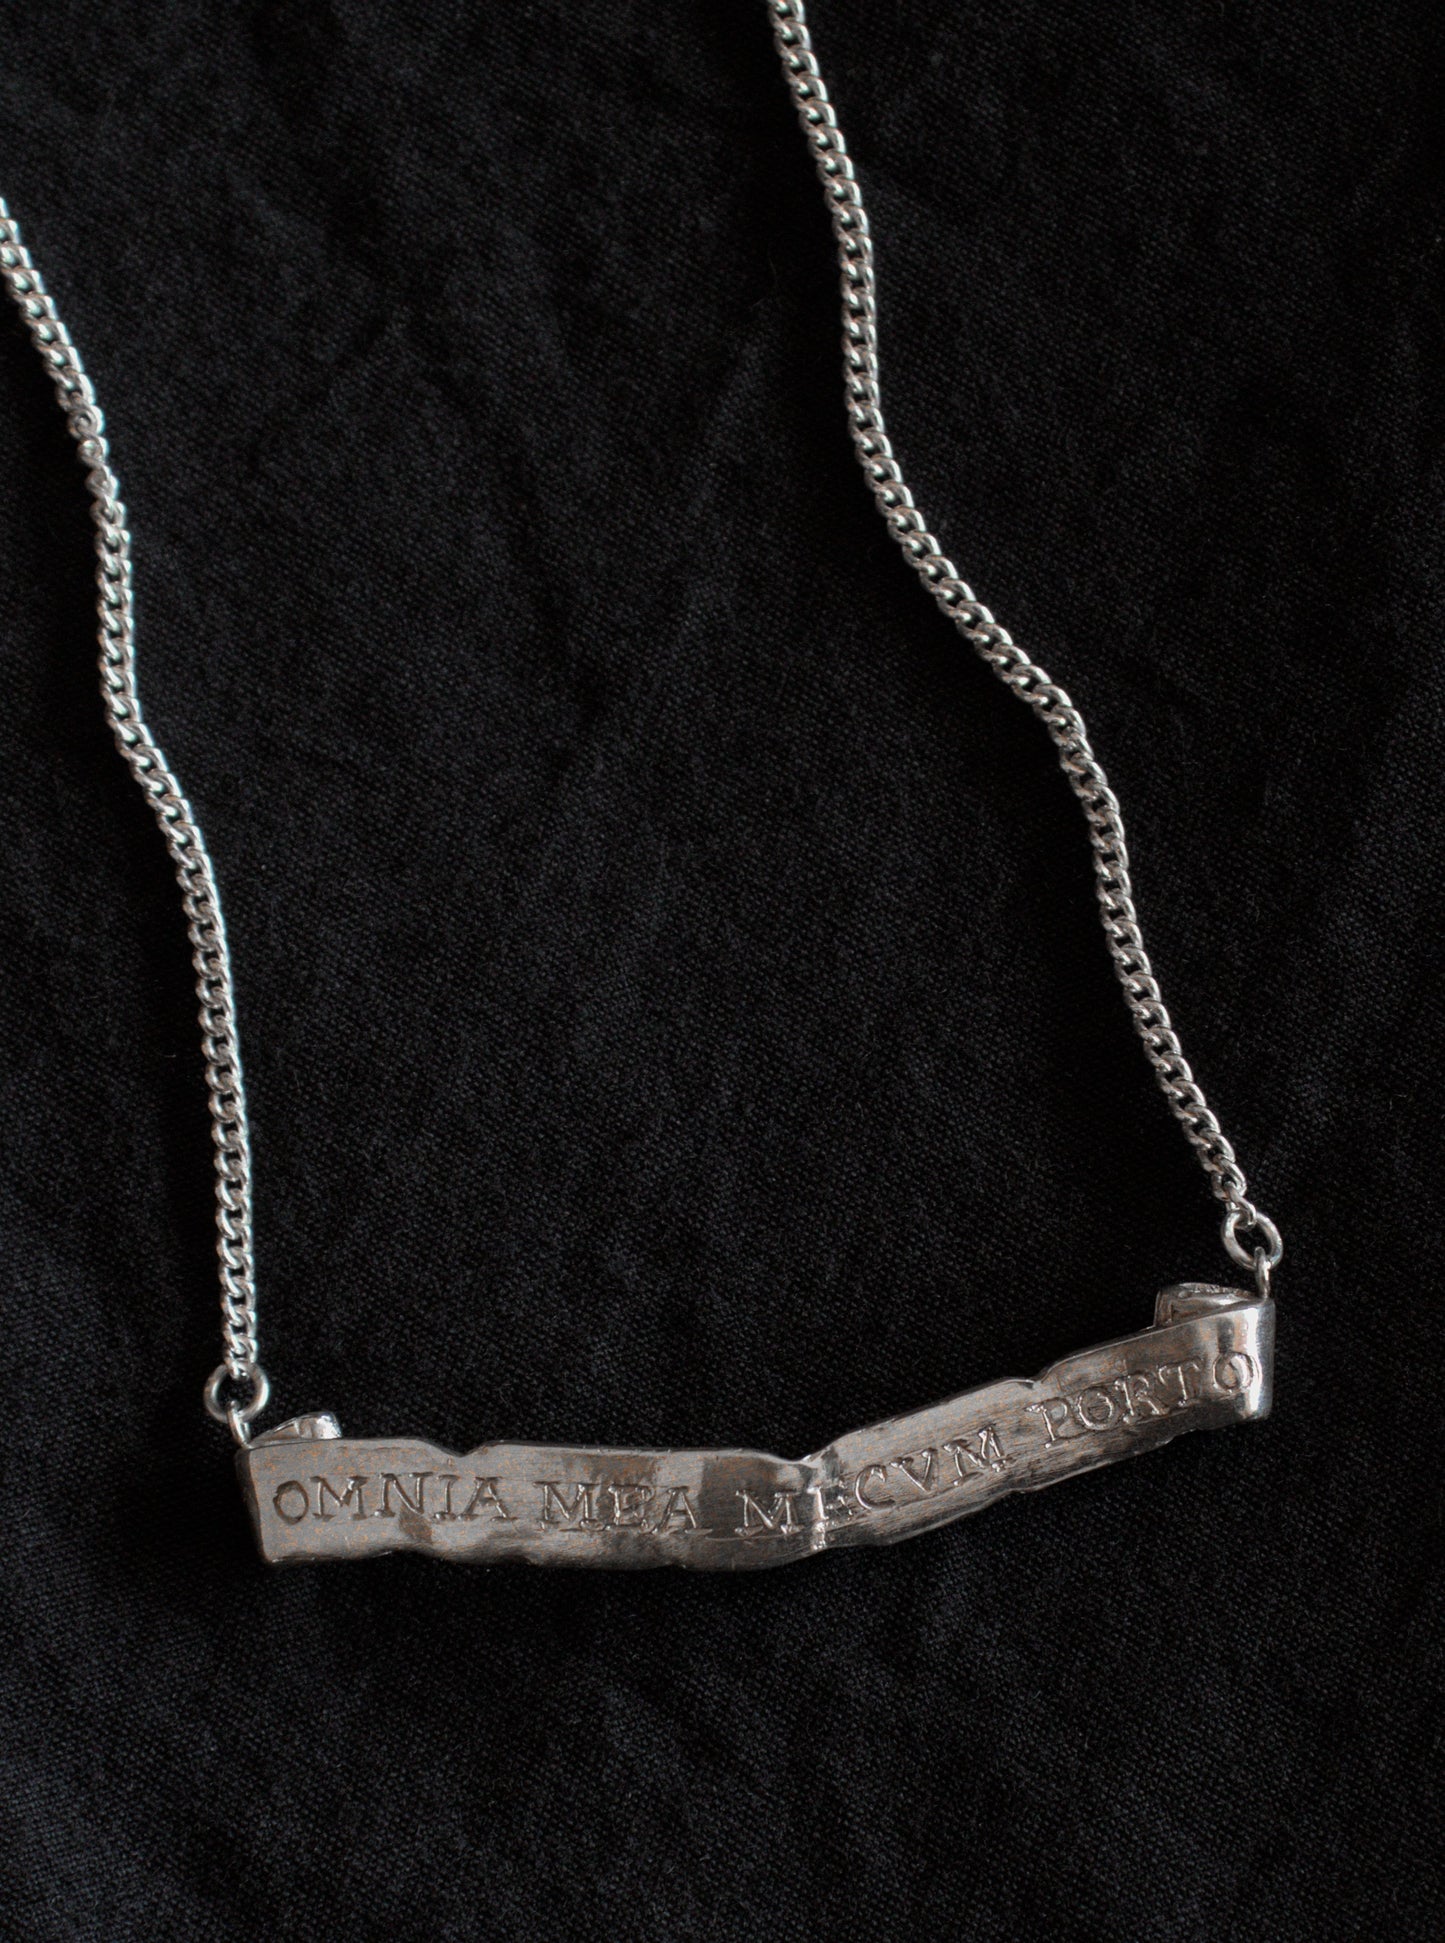 Hereafter necklace